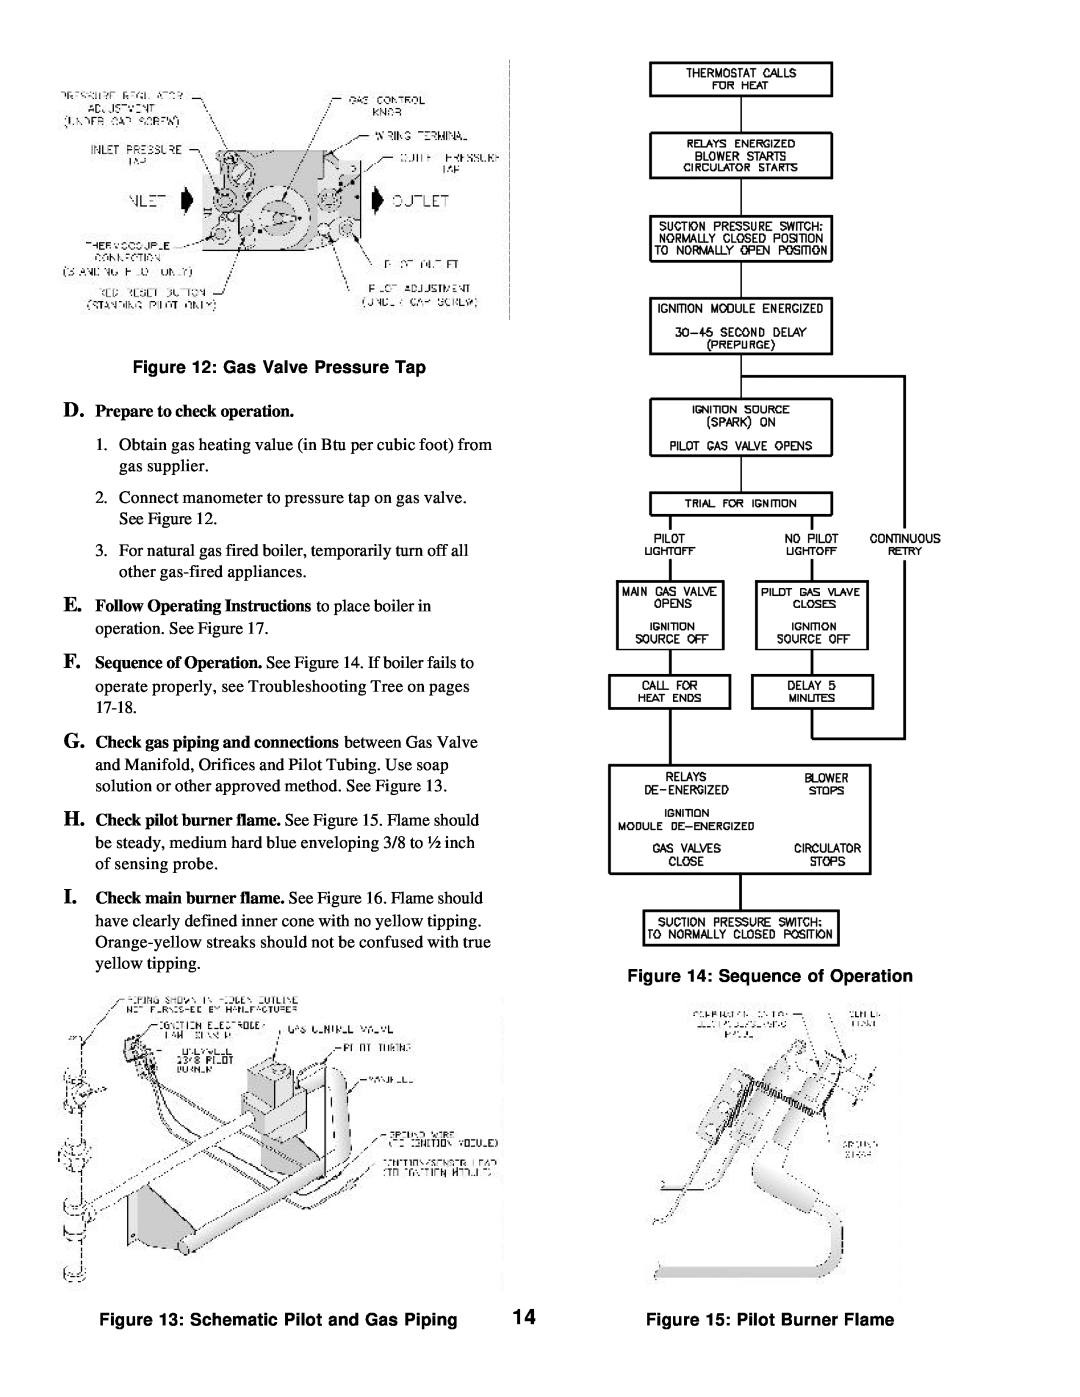 Burnham 20_PV_I manual Gas Valve Pressure Tap, Sequence of Operation, Schematic Pilot and Gas Piping, Pilot Burner Flame 